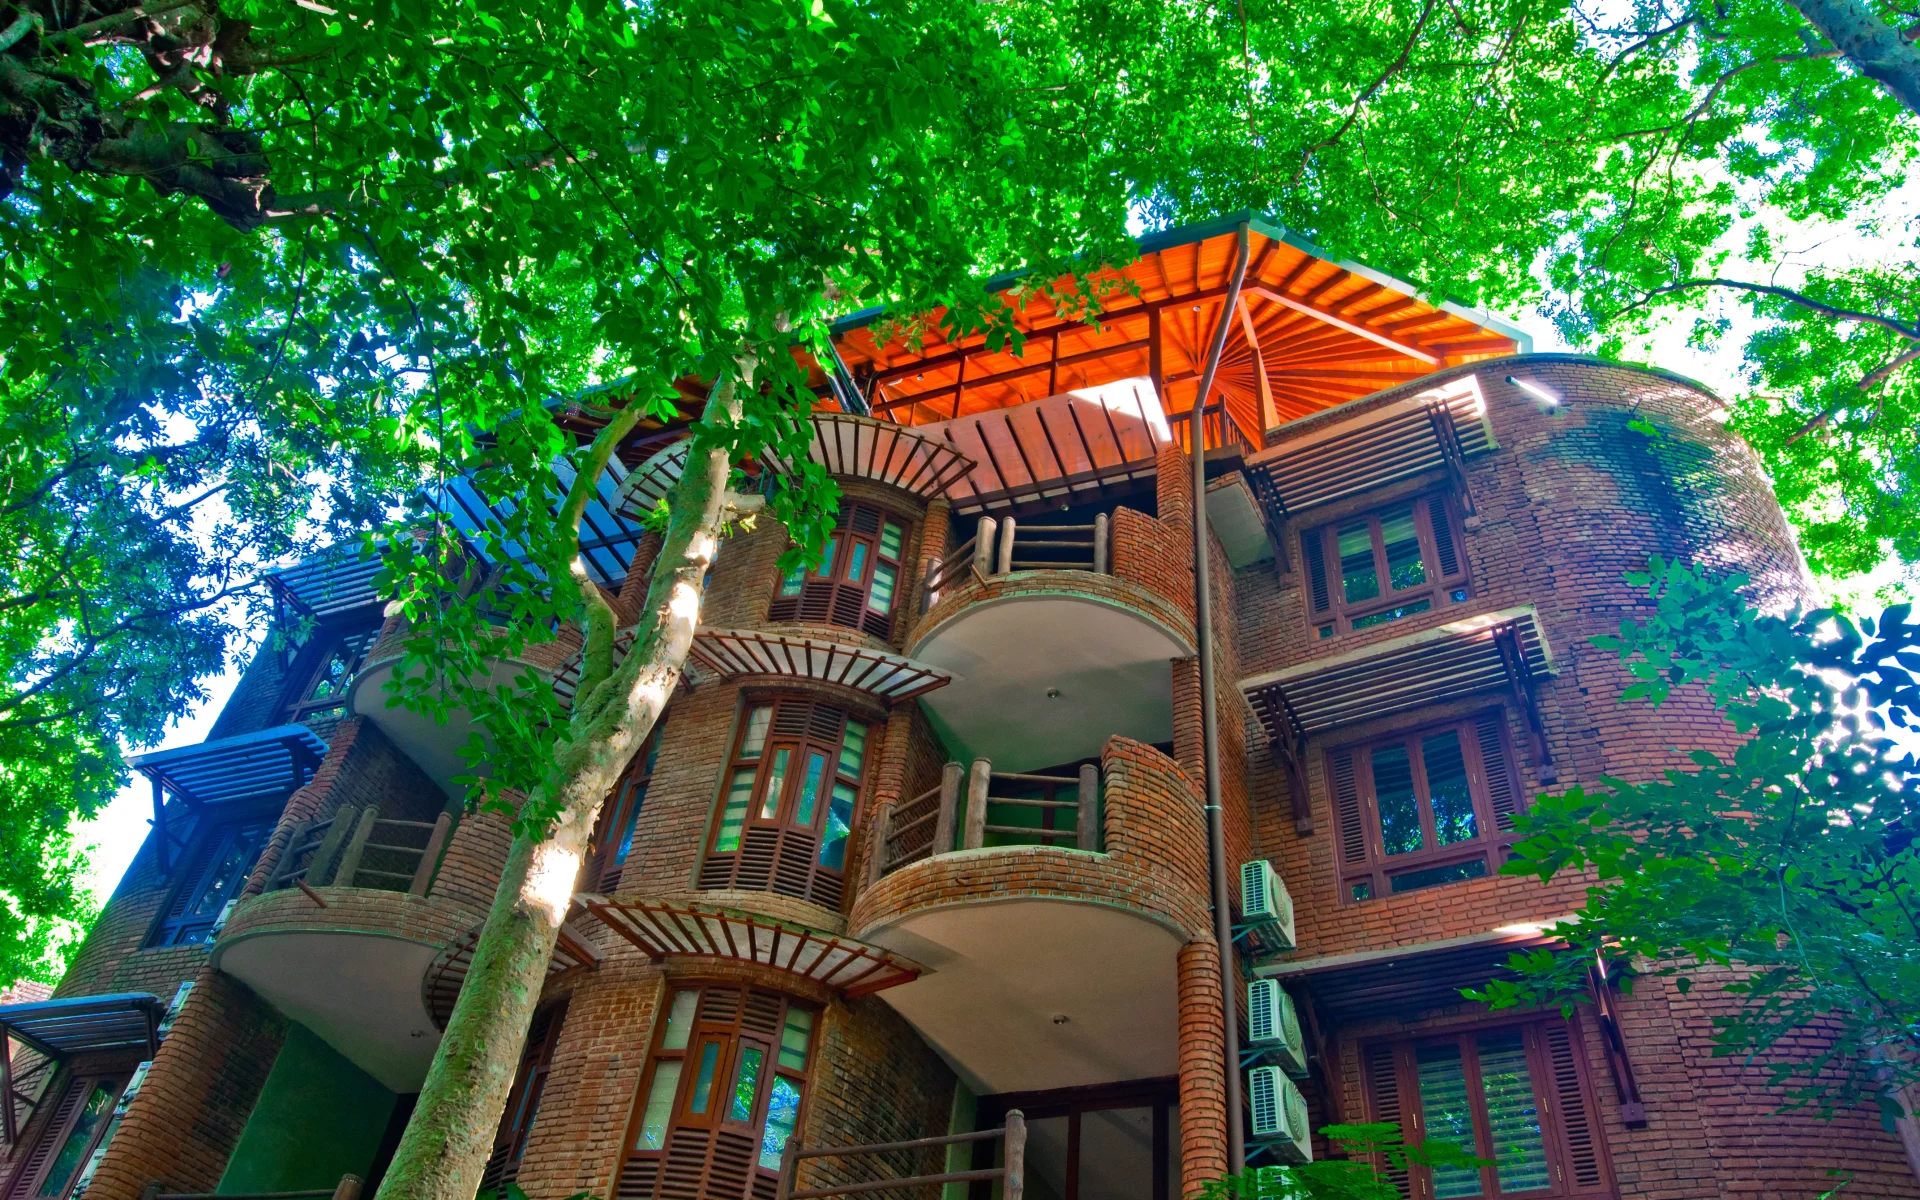 The main building has innovative architecture and is multi-storied, surrounded by tall trees.